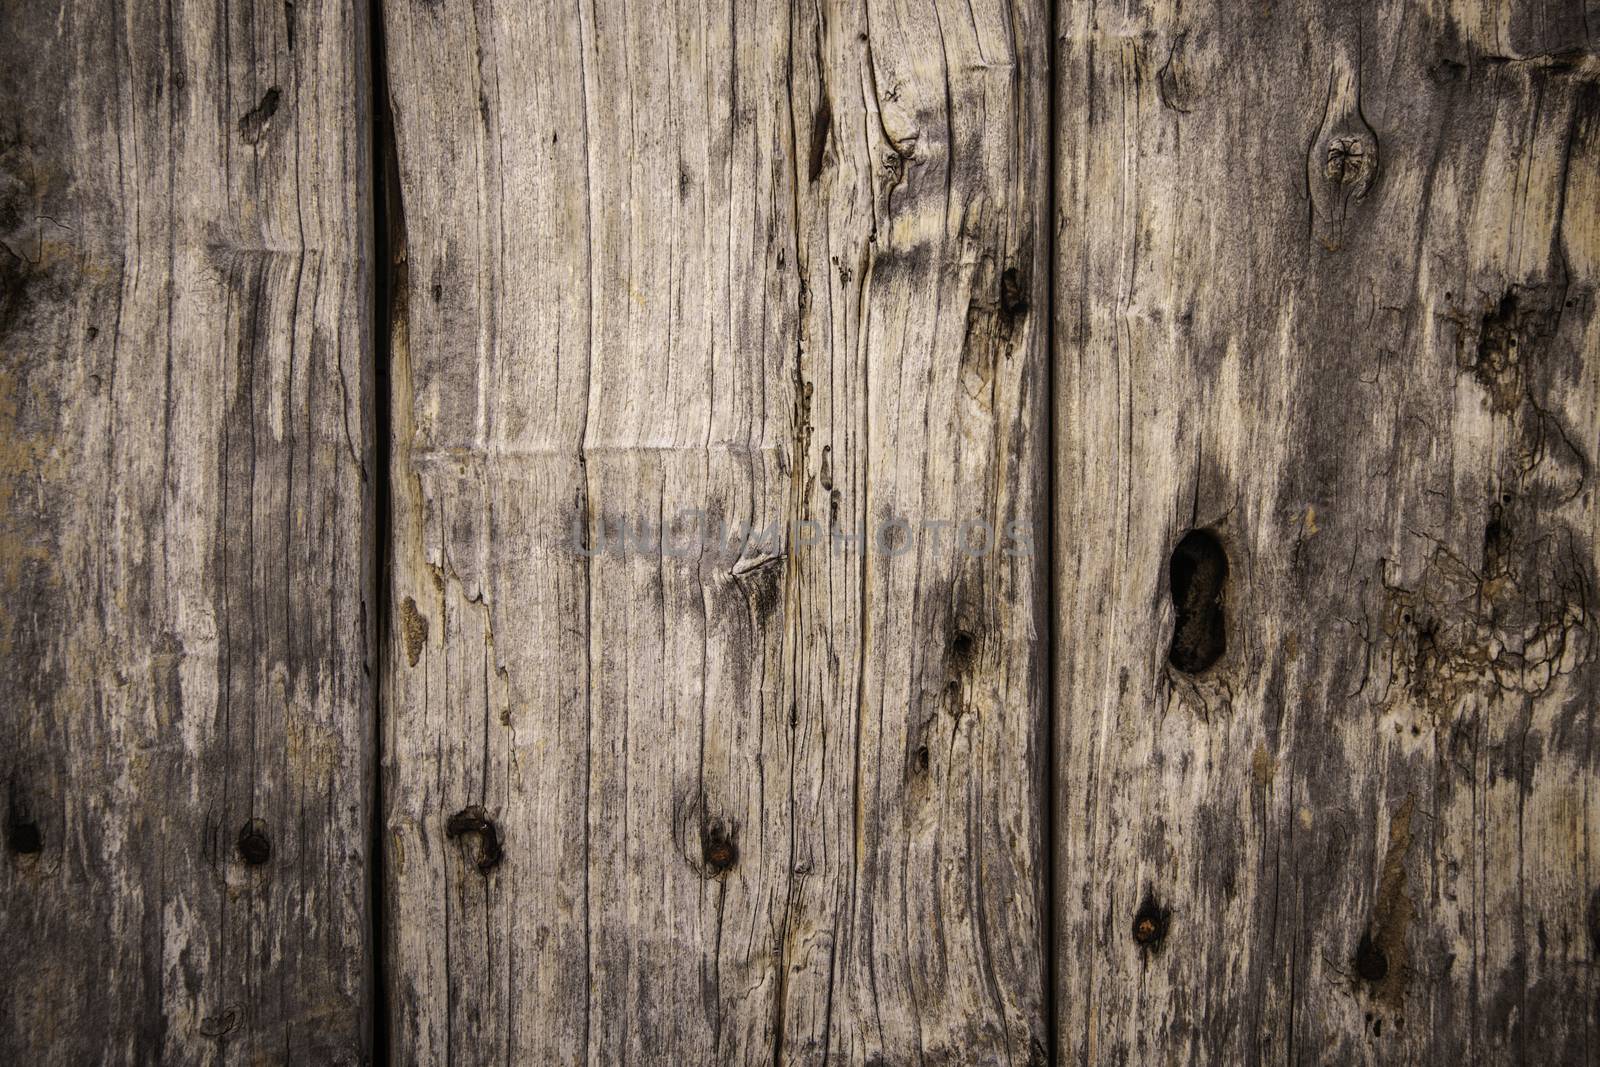 Old spoiled wood, detail of a wall decorated with abandoned wood